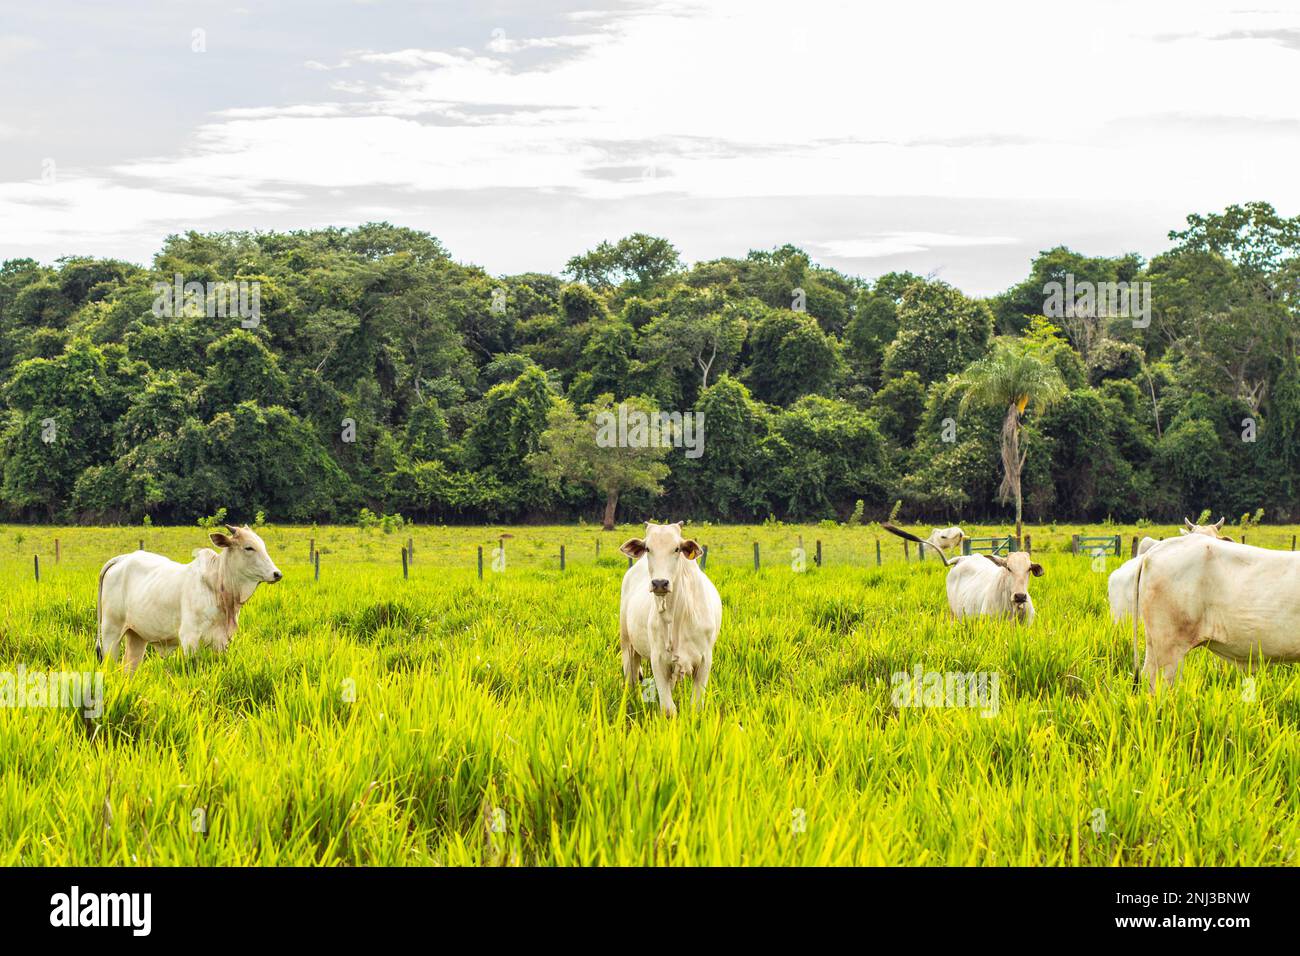 Goiania, Goias, Brazil – February 21, 2023:  A herd of white cattle in a fresh green pasture on a sunless day with blurred trees in the background. Stock Photo